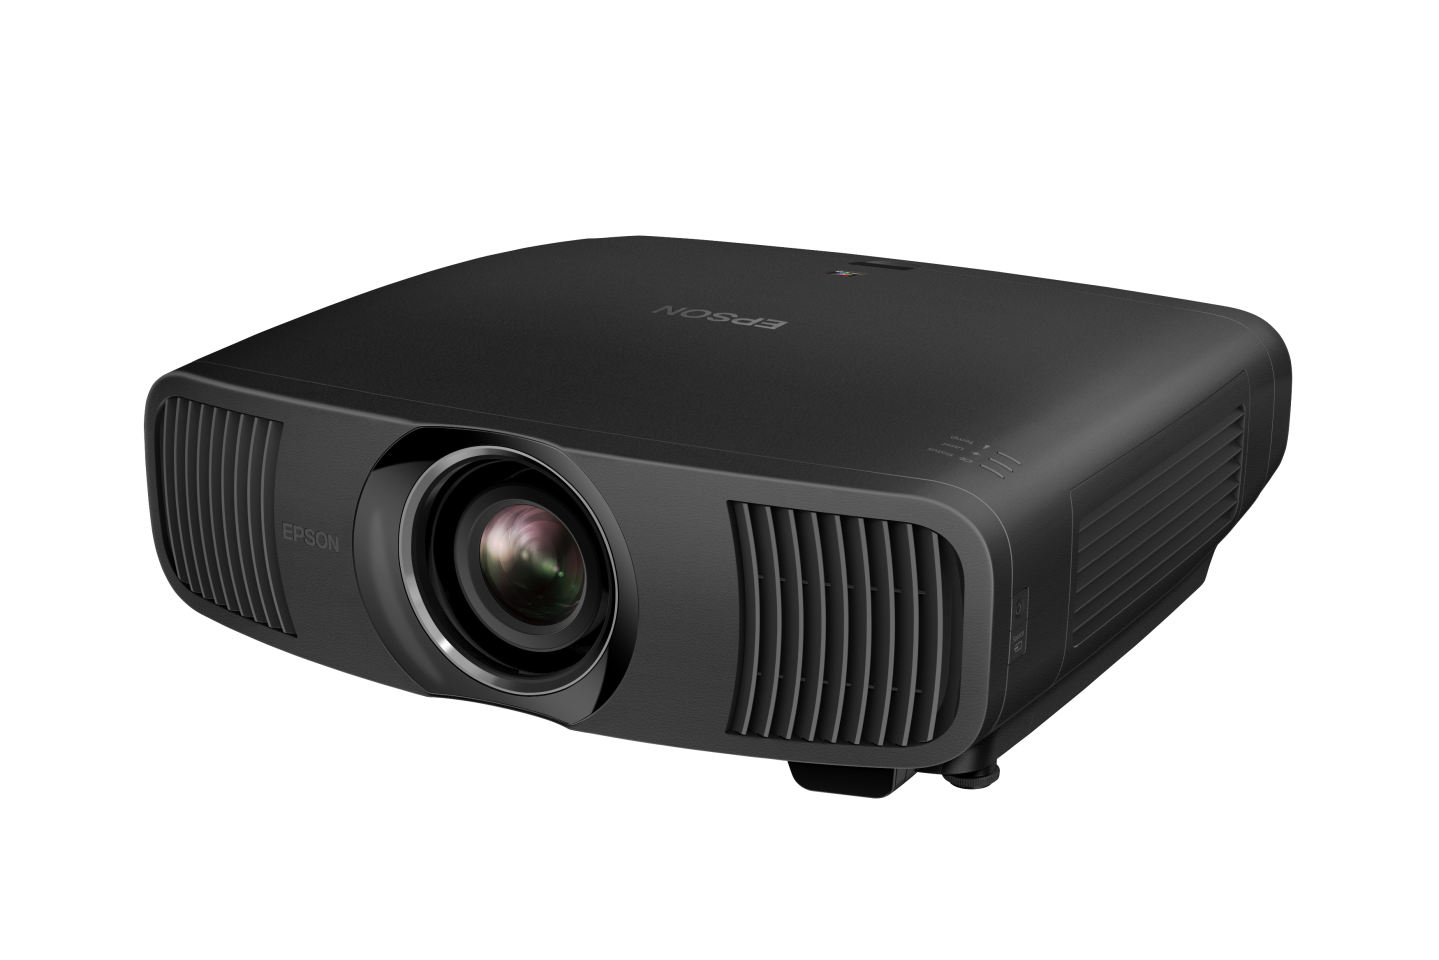 The LS12000 4K laser projector can output 2,700 lumens of white and color brightness, offers a dynamic contrast of 2,5000,000:1 and can throw up to 300 diagonal inches on a wall or screen